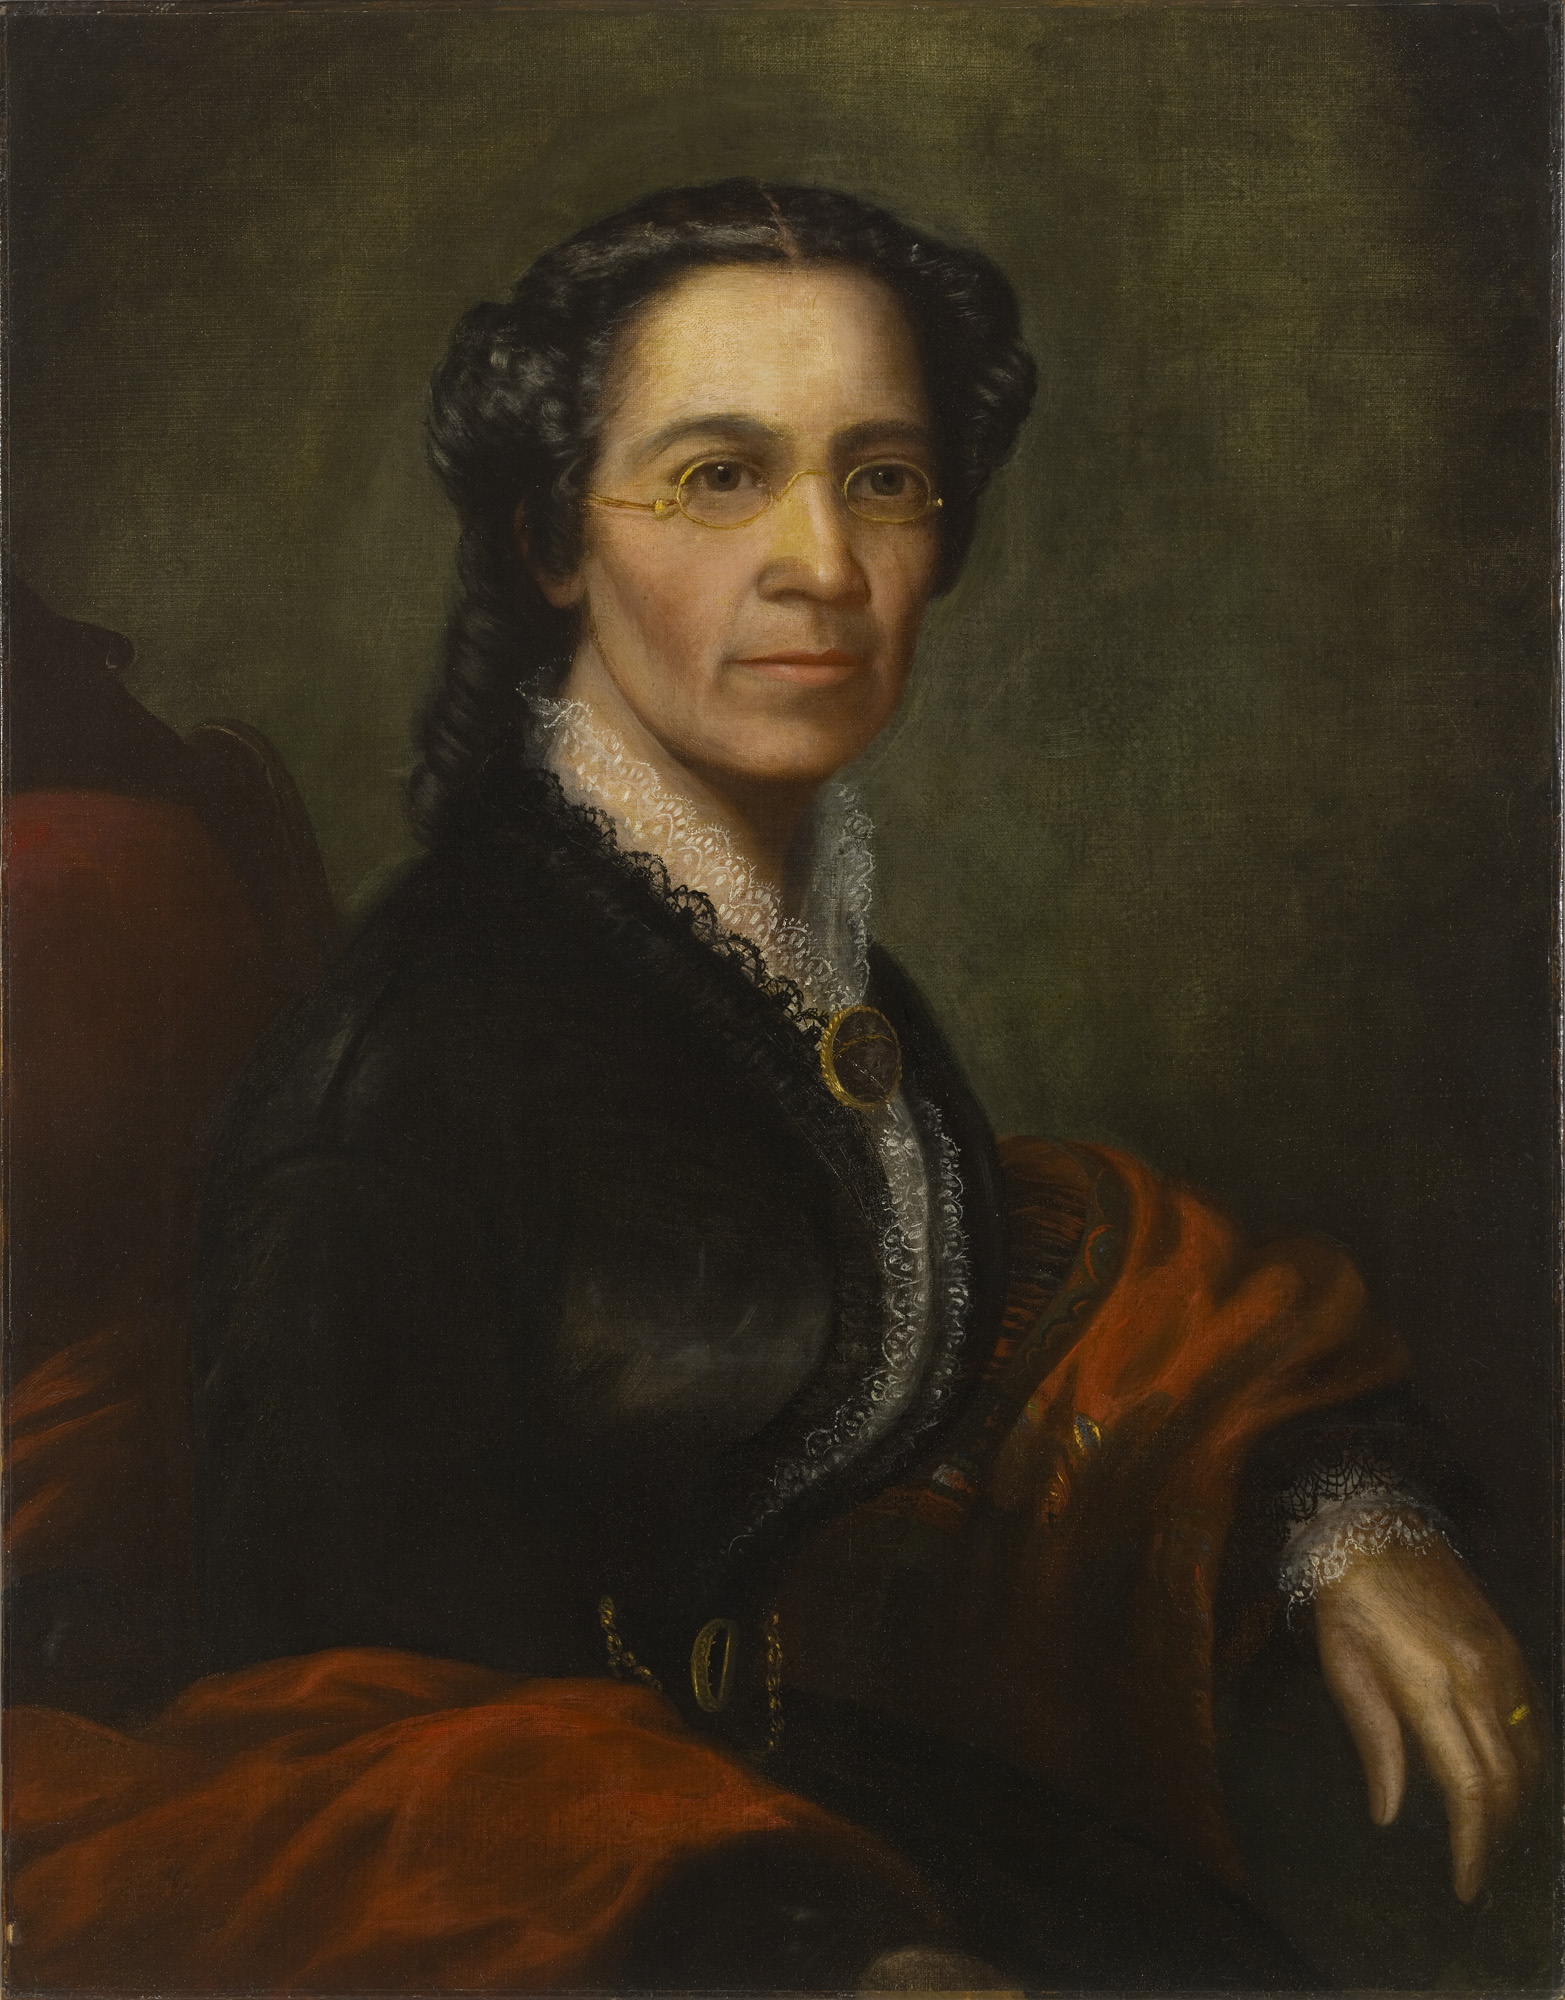 Aaron E. Darling, Mary Richardson Jones, c. 1865, oil on canvas, 33 1/2 x 27 1/2 inches (Chicago History Museum)